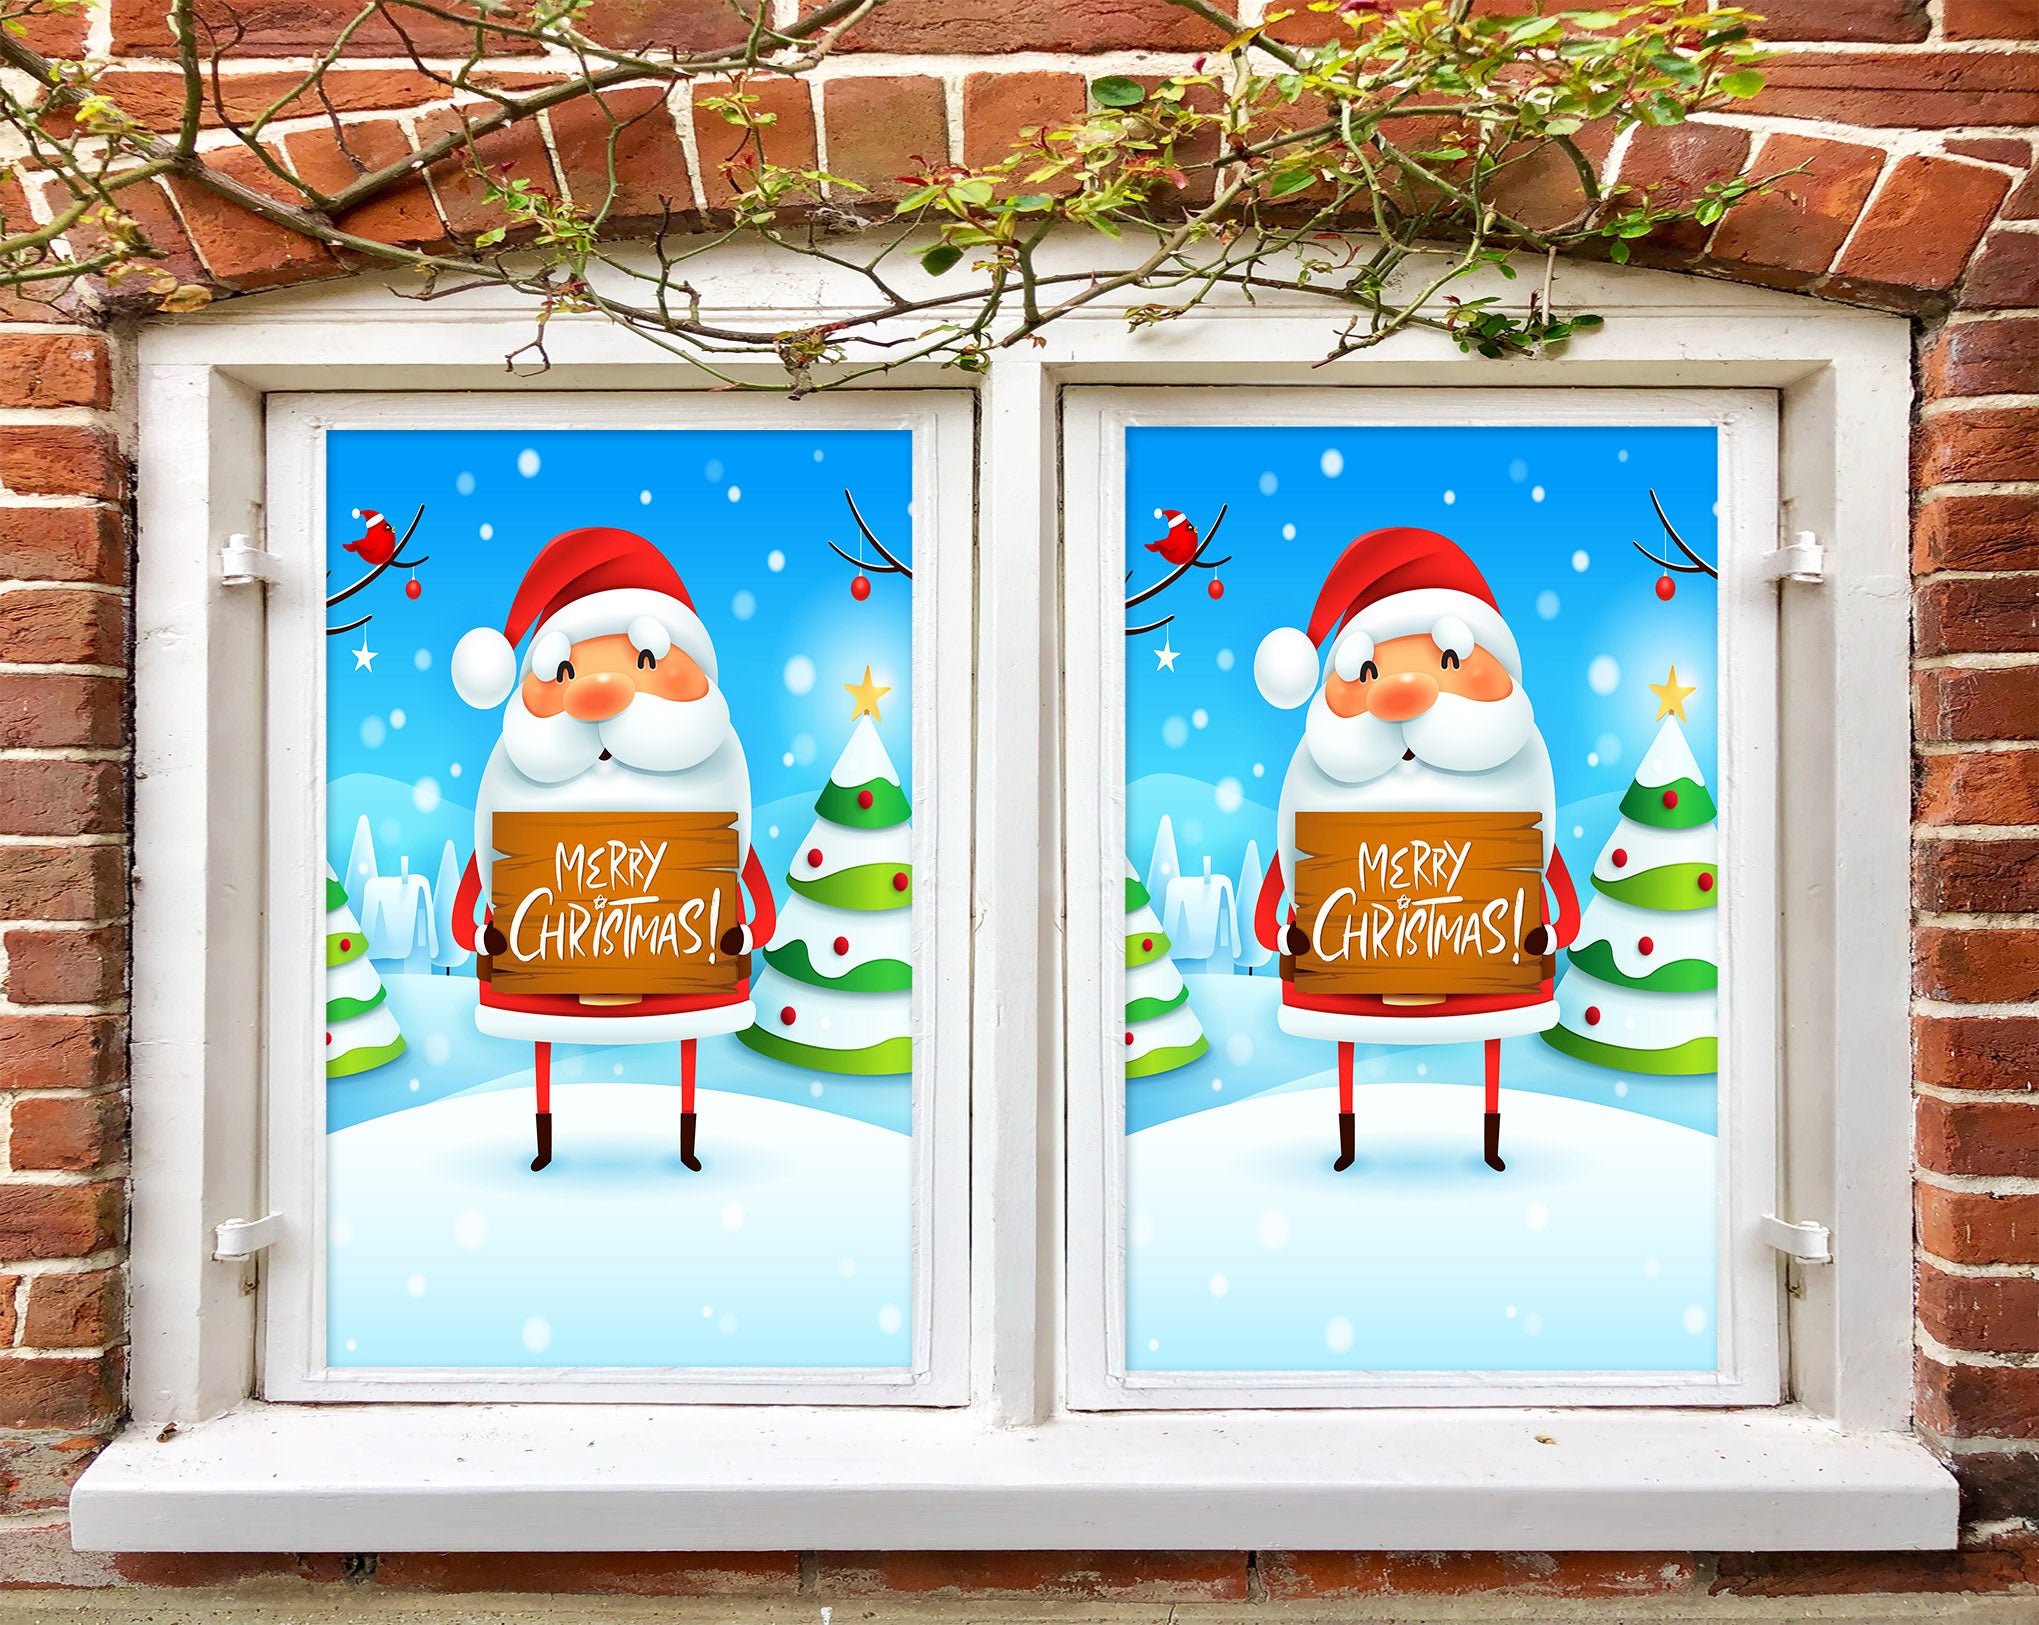 3D Santa Claus 43139 Christmas Window Film Print Sticker Cling Stained Glass Xmas